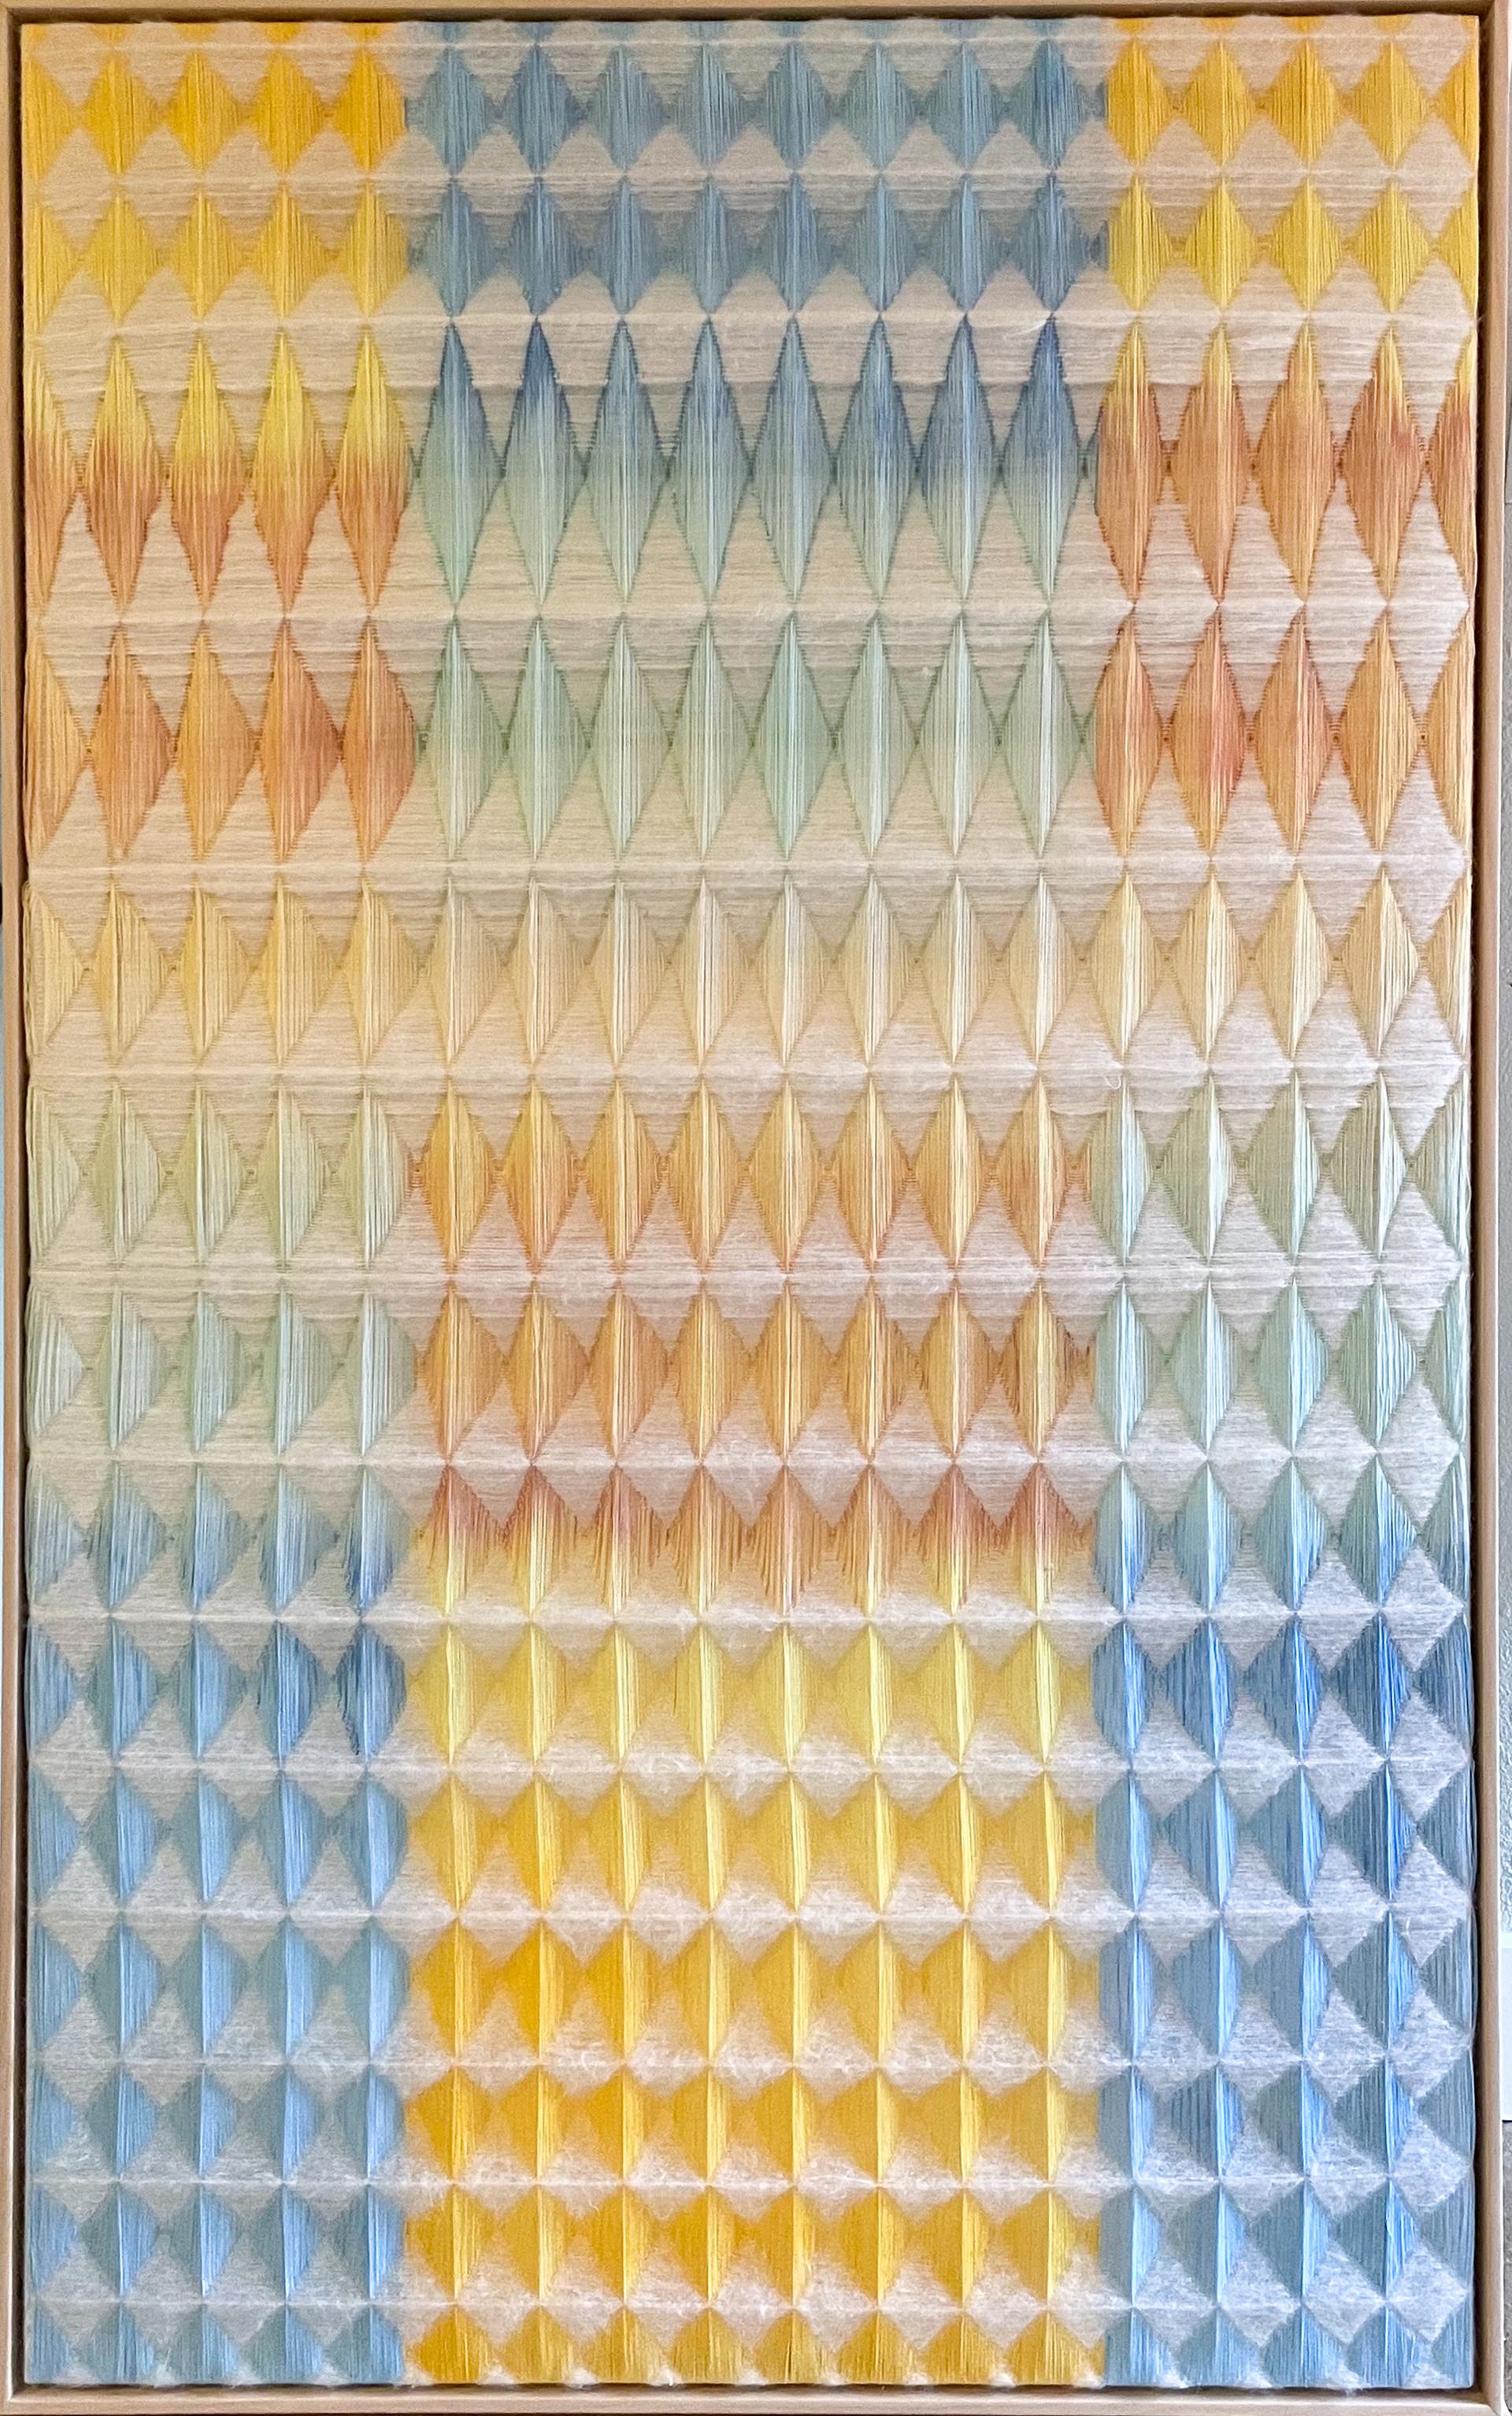 *On view at Ivester Contemporary through May 27th* 

Cloud Nine by Anya Molyviatis is a part of an ongoing series of three dimensional textiles that are handwoven on AVL Dobby Looms. The work uses dramatic color gradients as well as physical depth